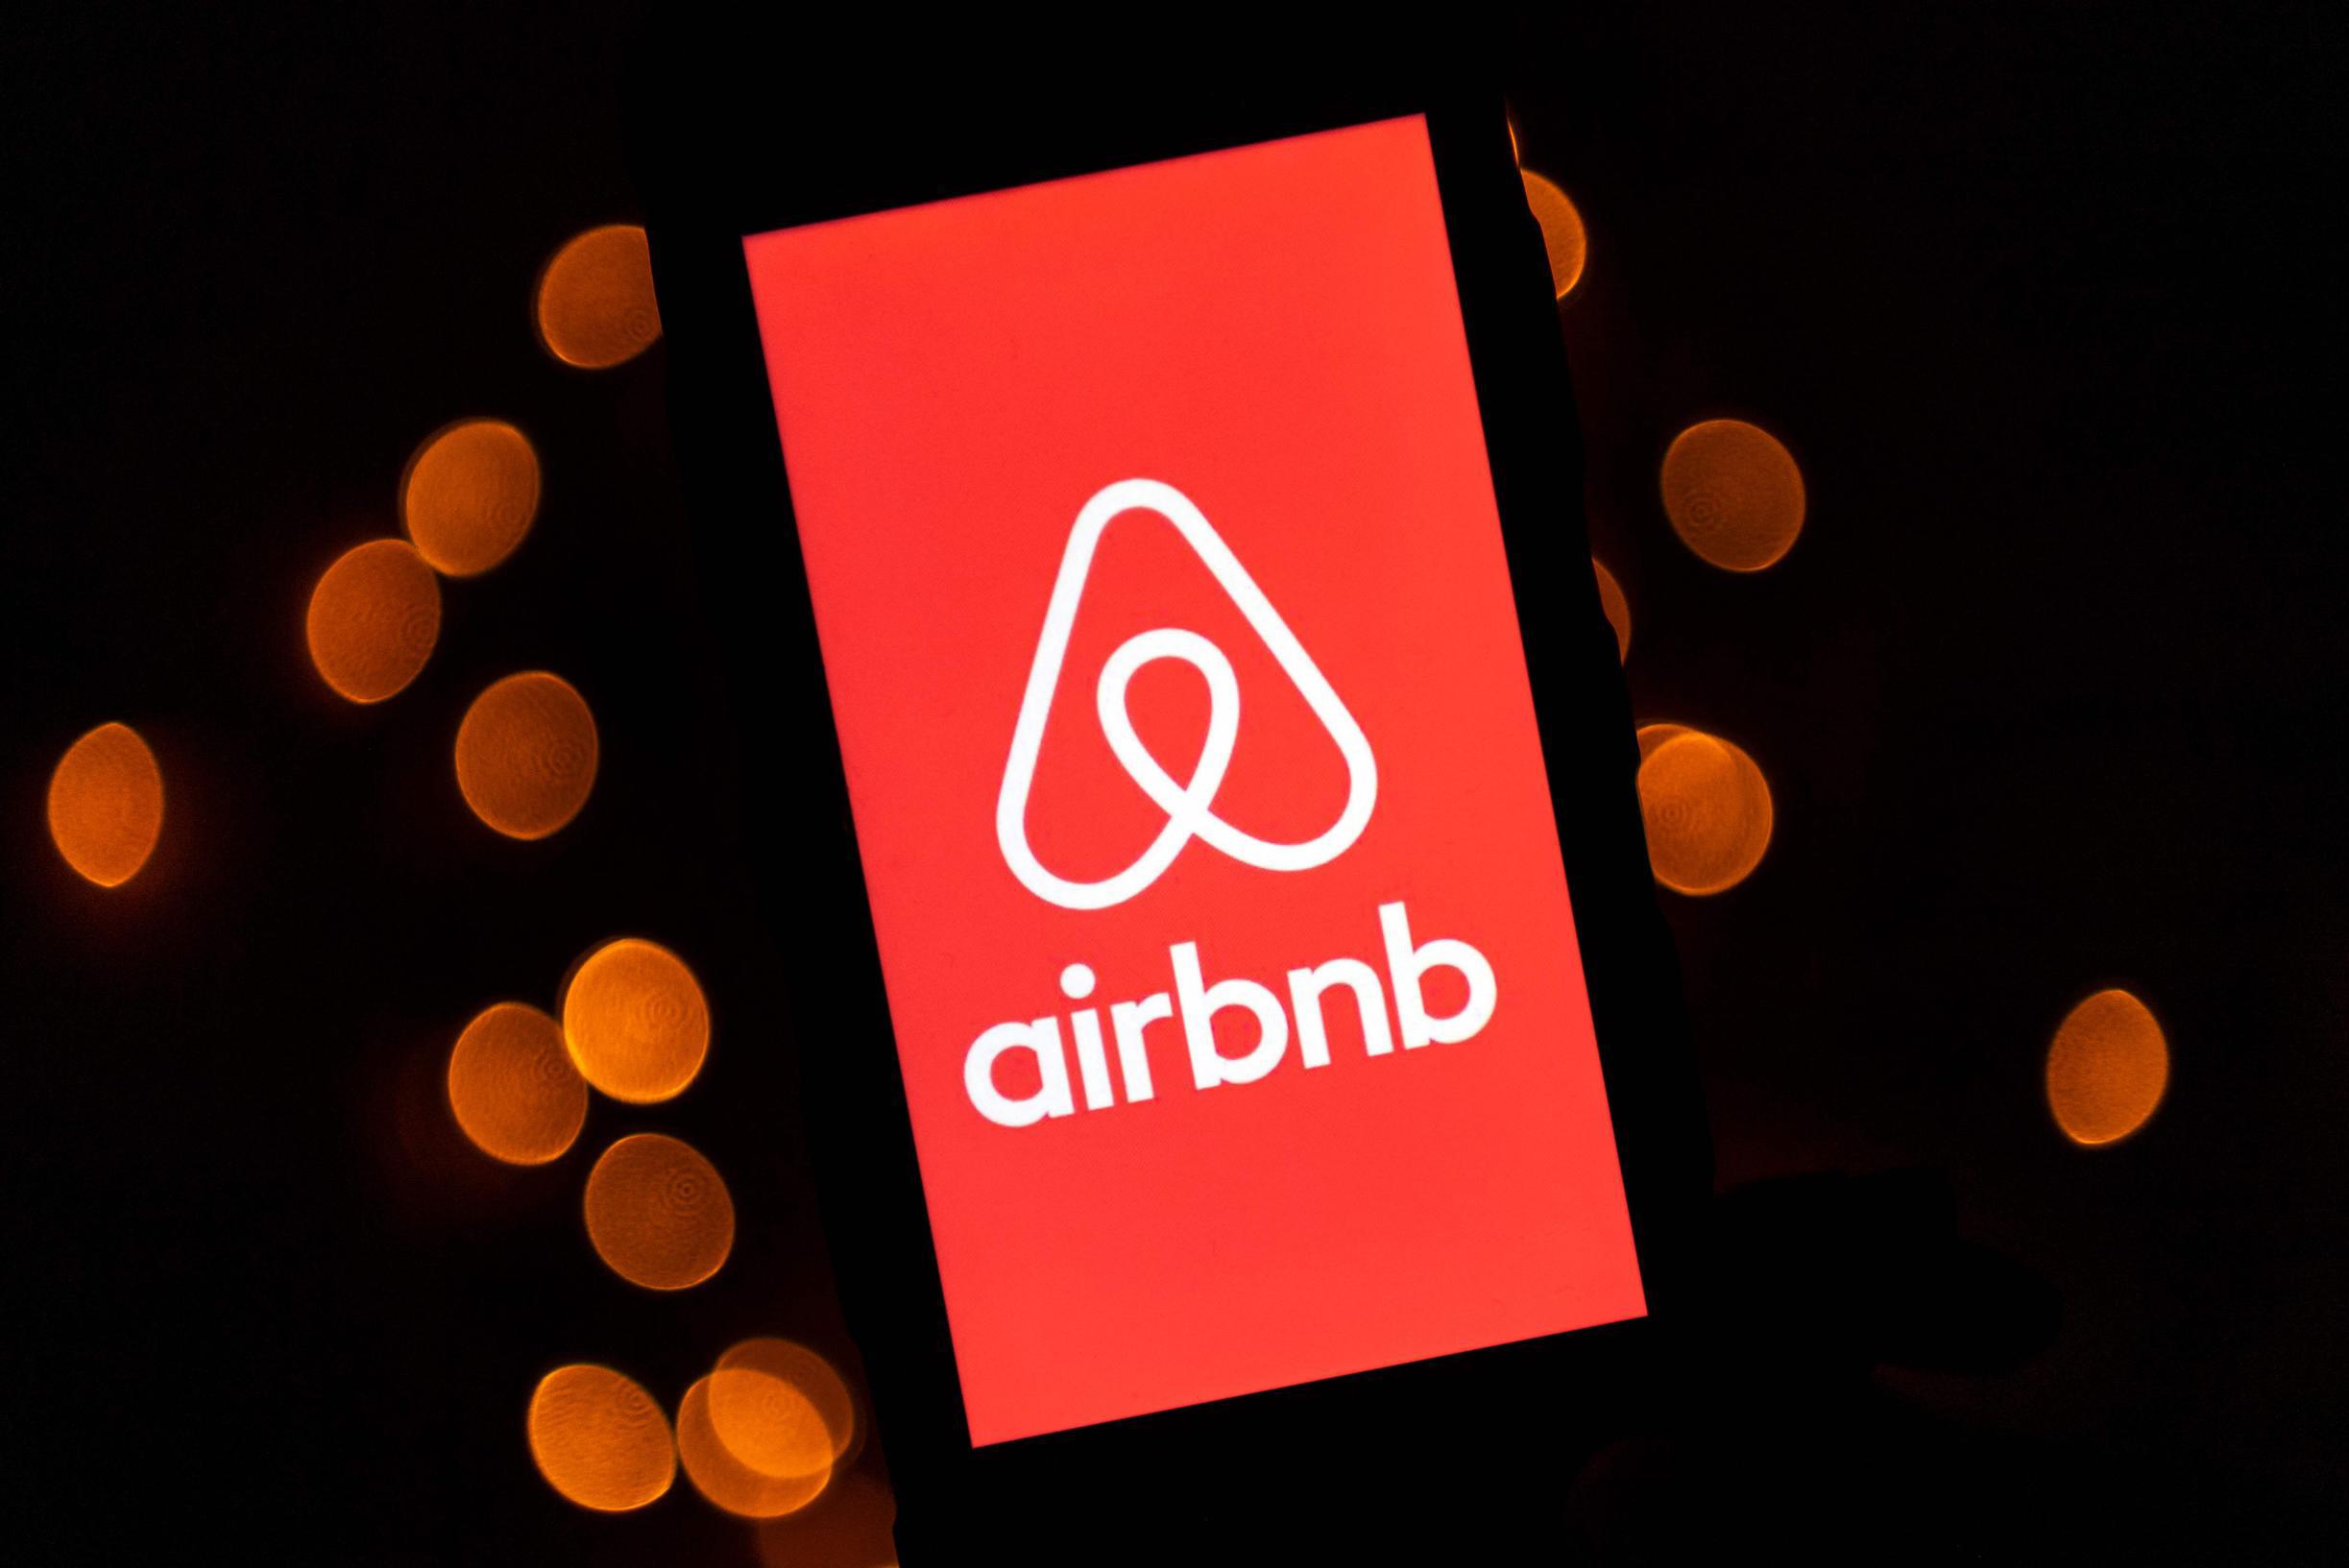 Airbnb aims to expand its presence in Belgium